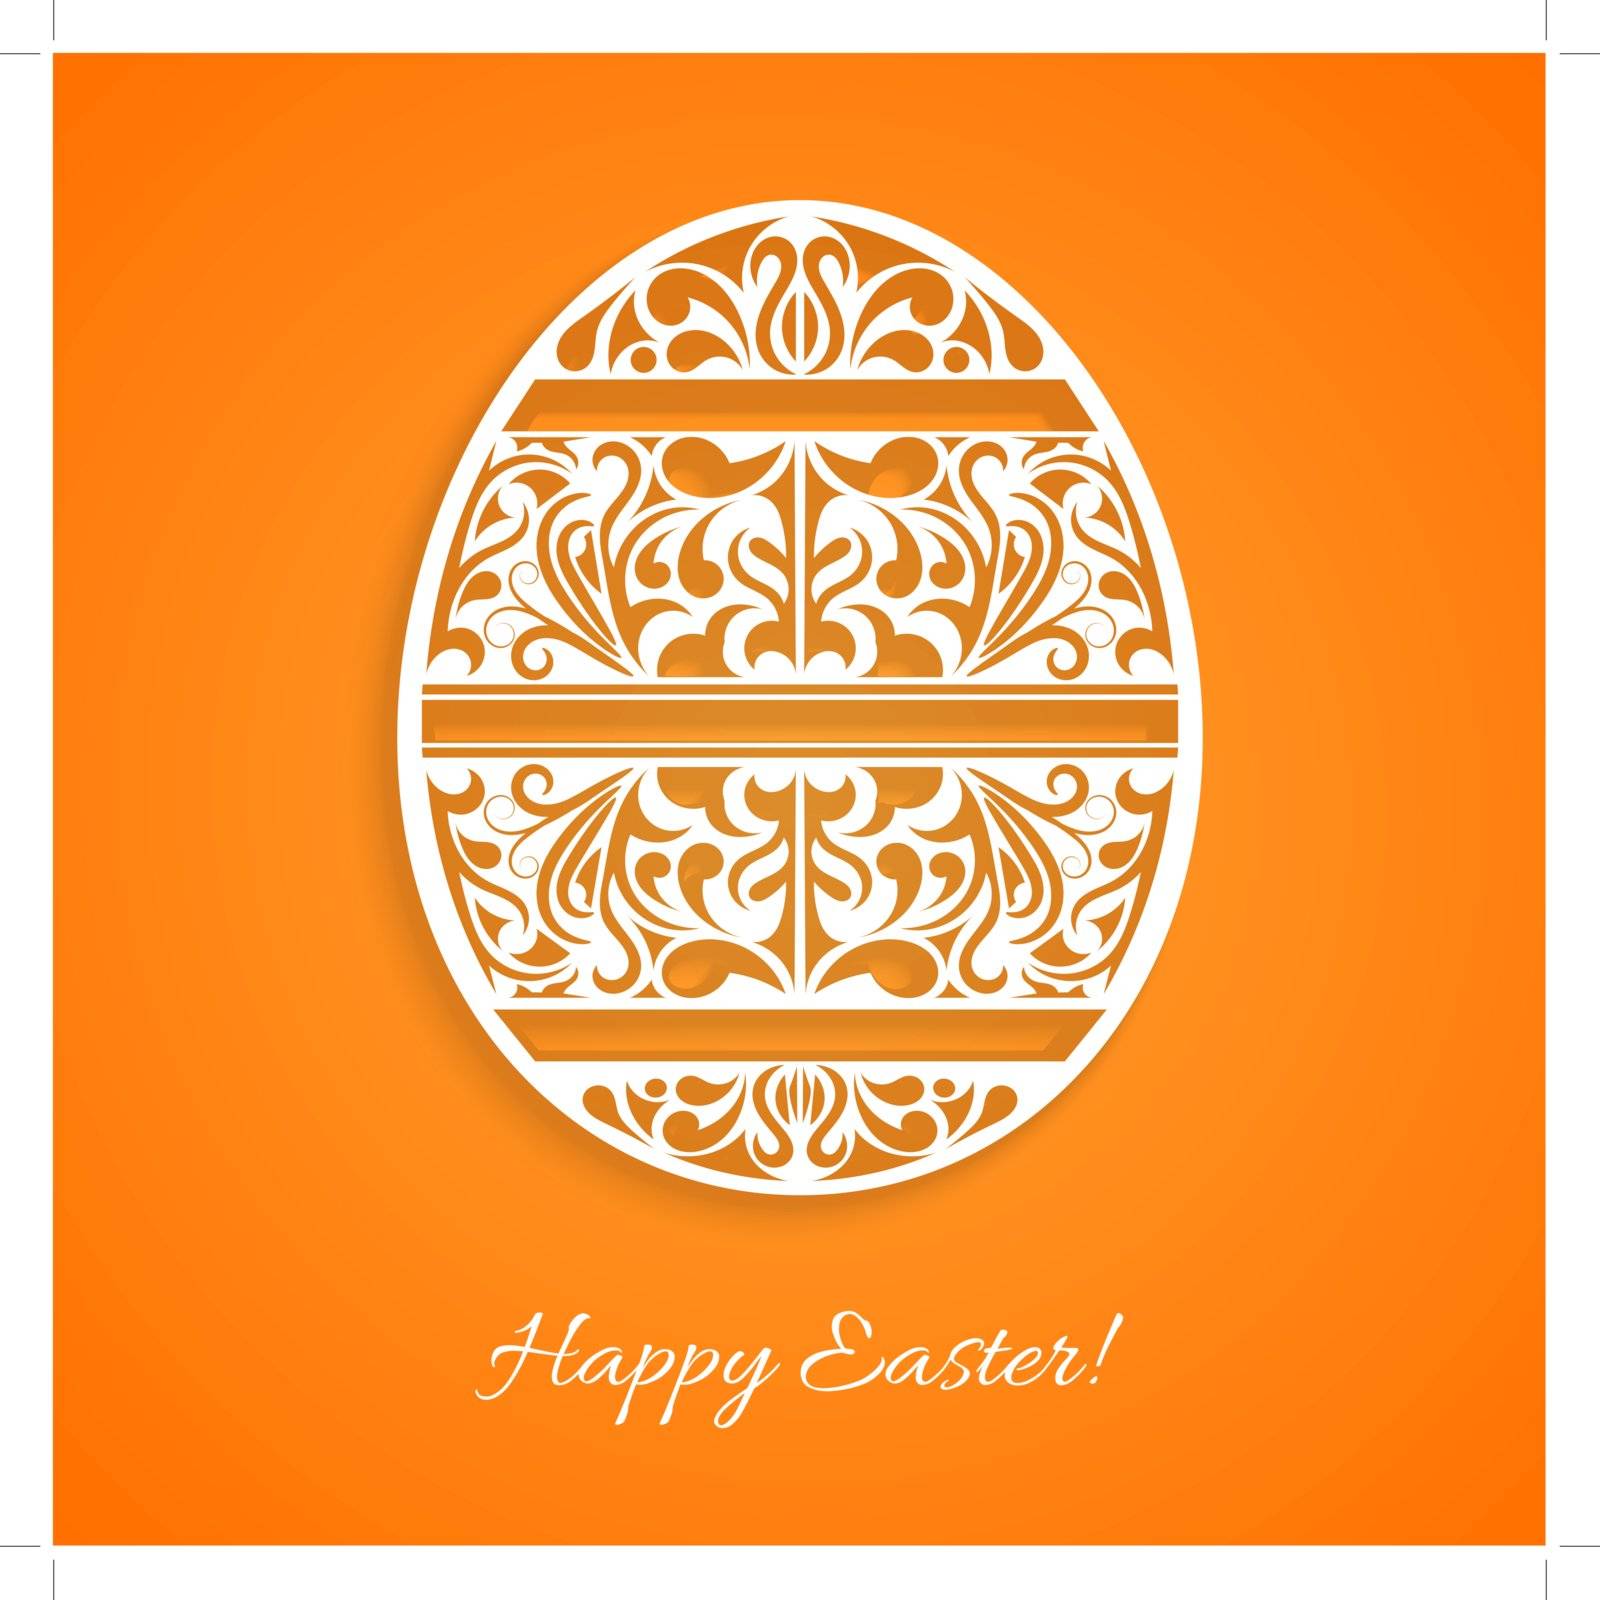 Orange background with a paper easter egg by Larser